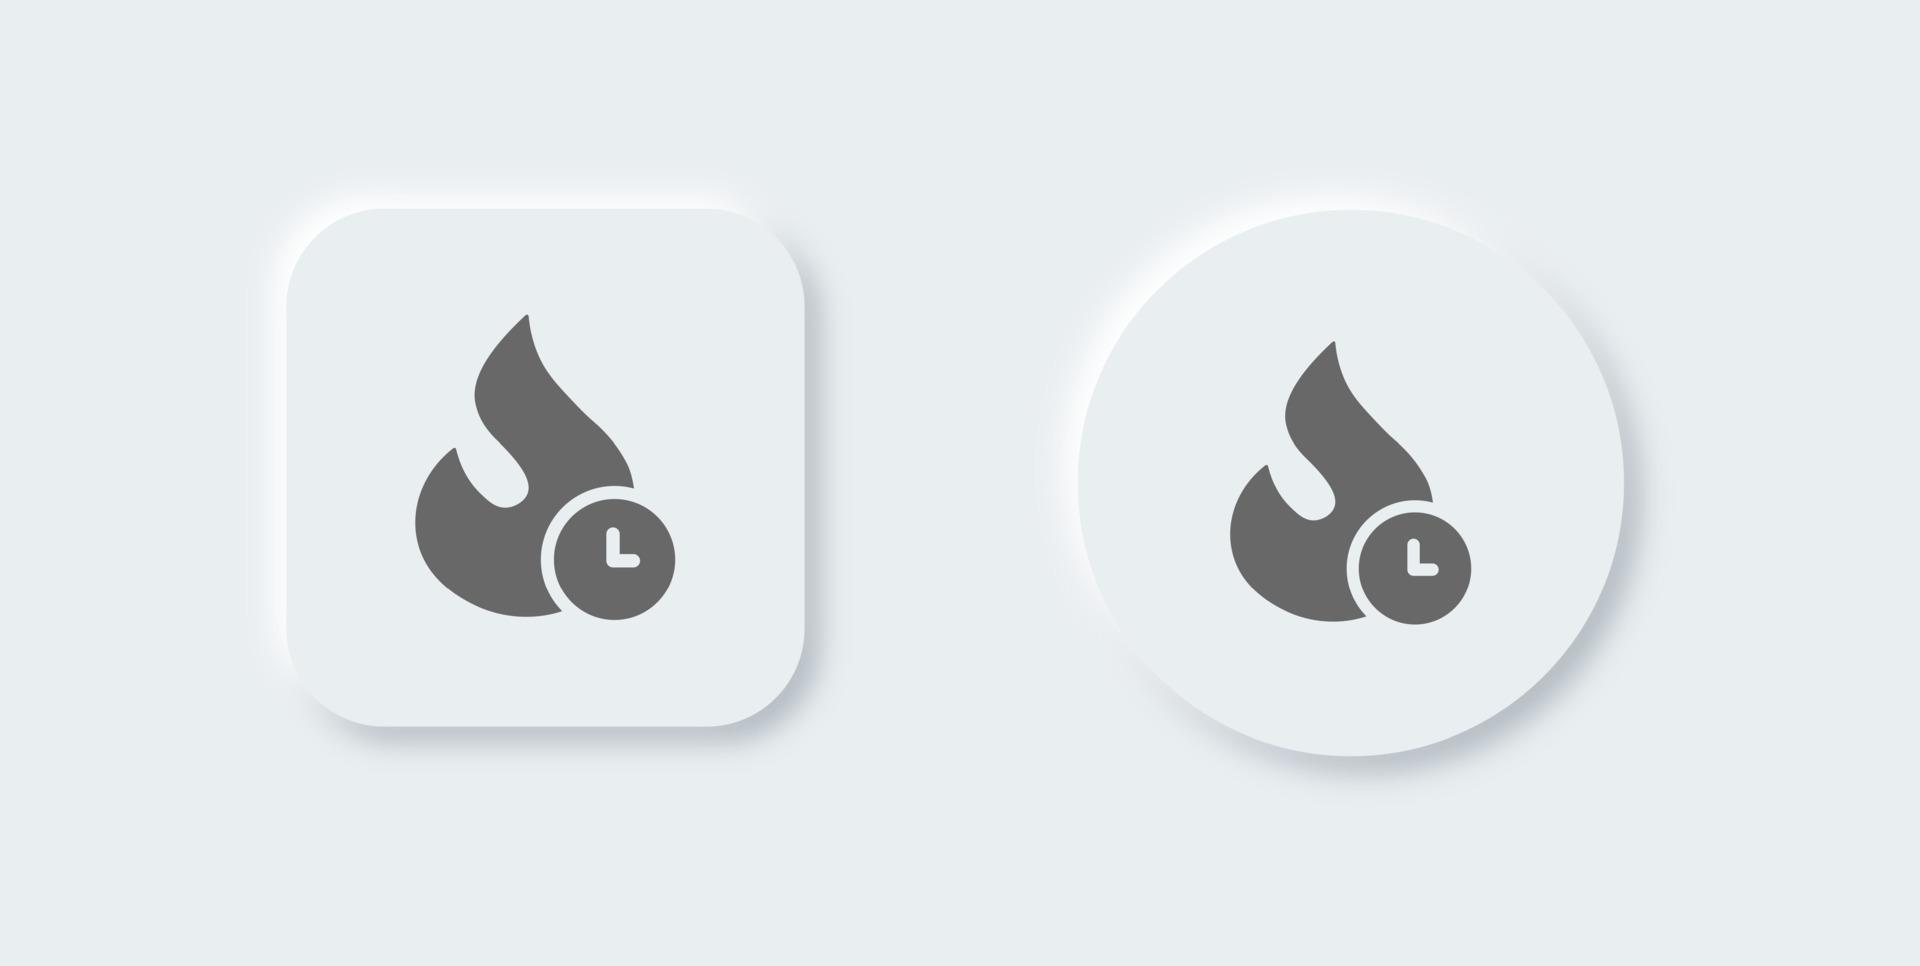 Trend solid icon in neomorphic design style. Fire signs vector illustration.